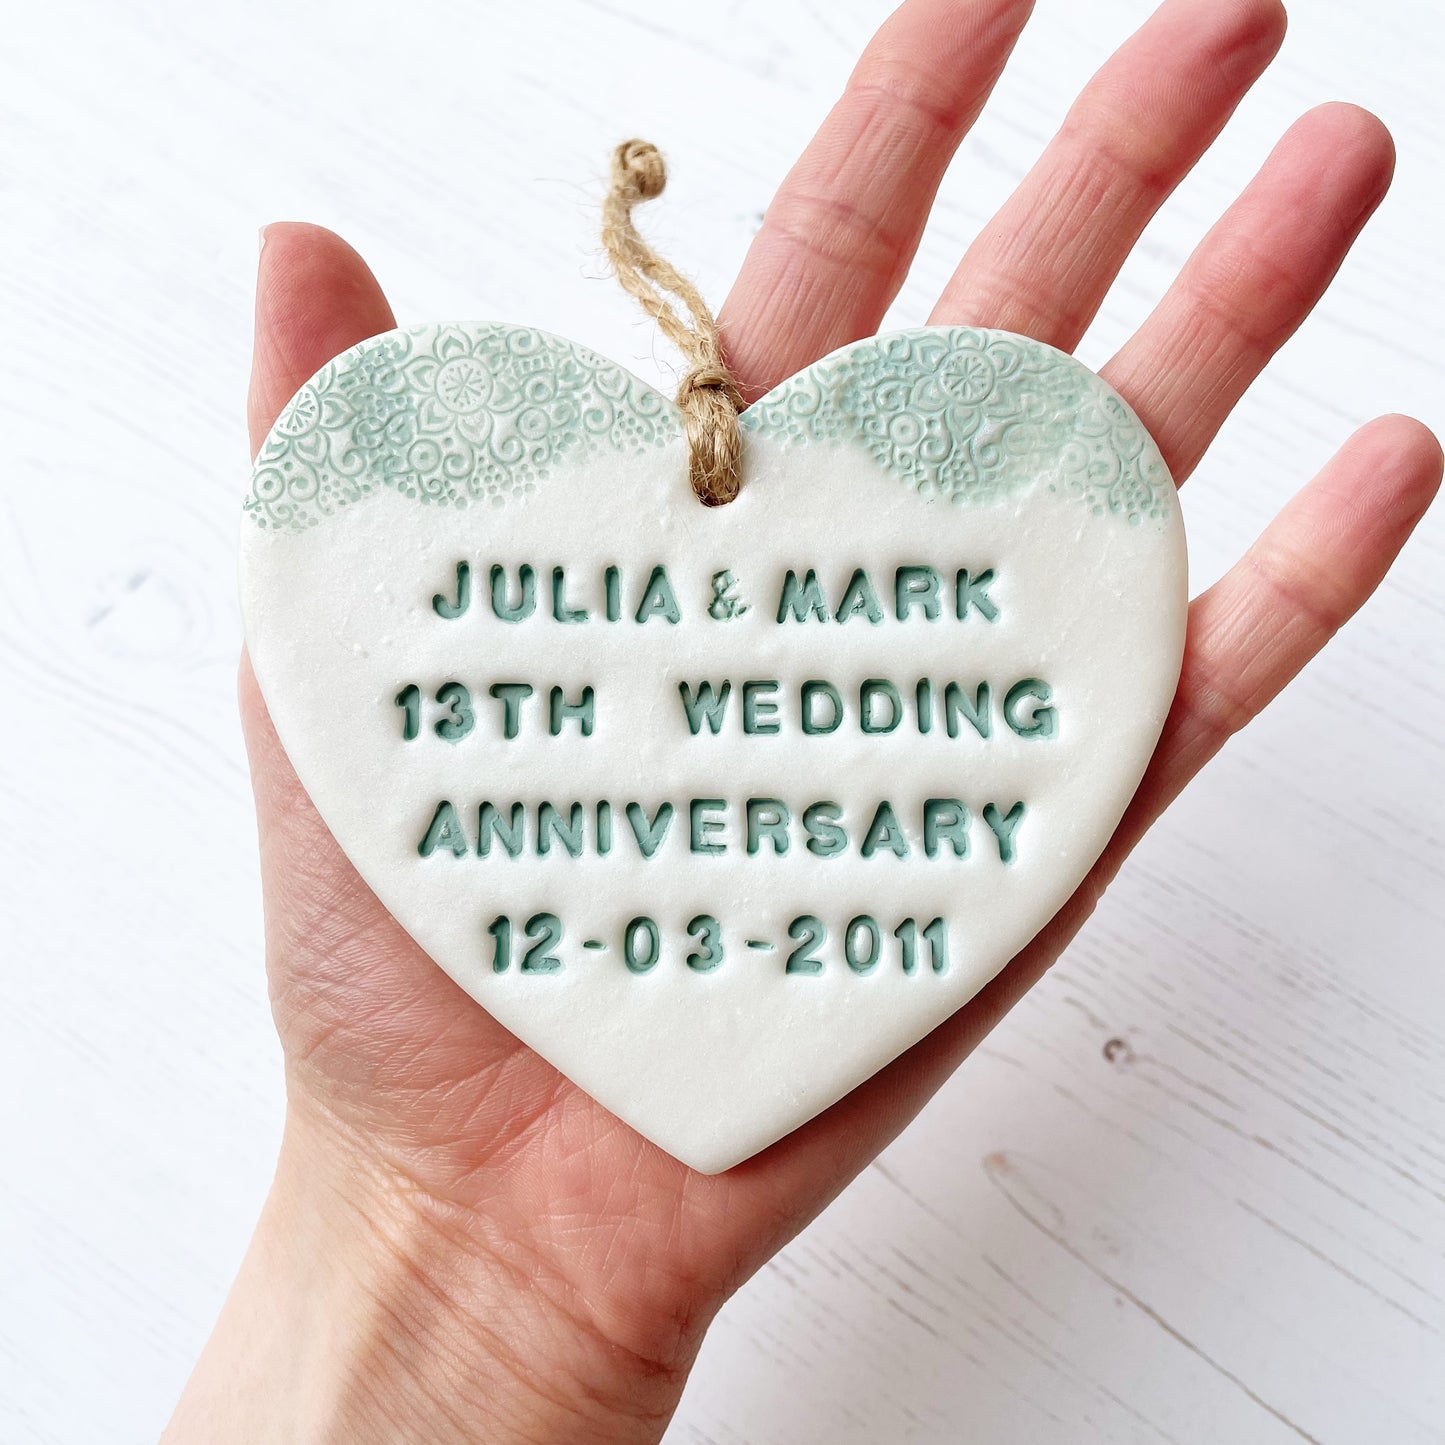 Personalised 13th wedding anniversary gift, pearlised white clay hanging heart with a sage green lace edge at the top of the heart, the heart is personalised with JULIA & MARK 13TH WEDDING ANNIVERSARY 12.03.2011